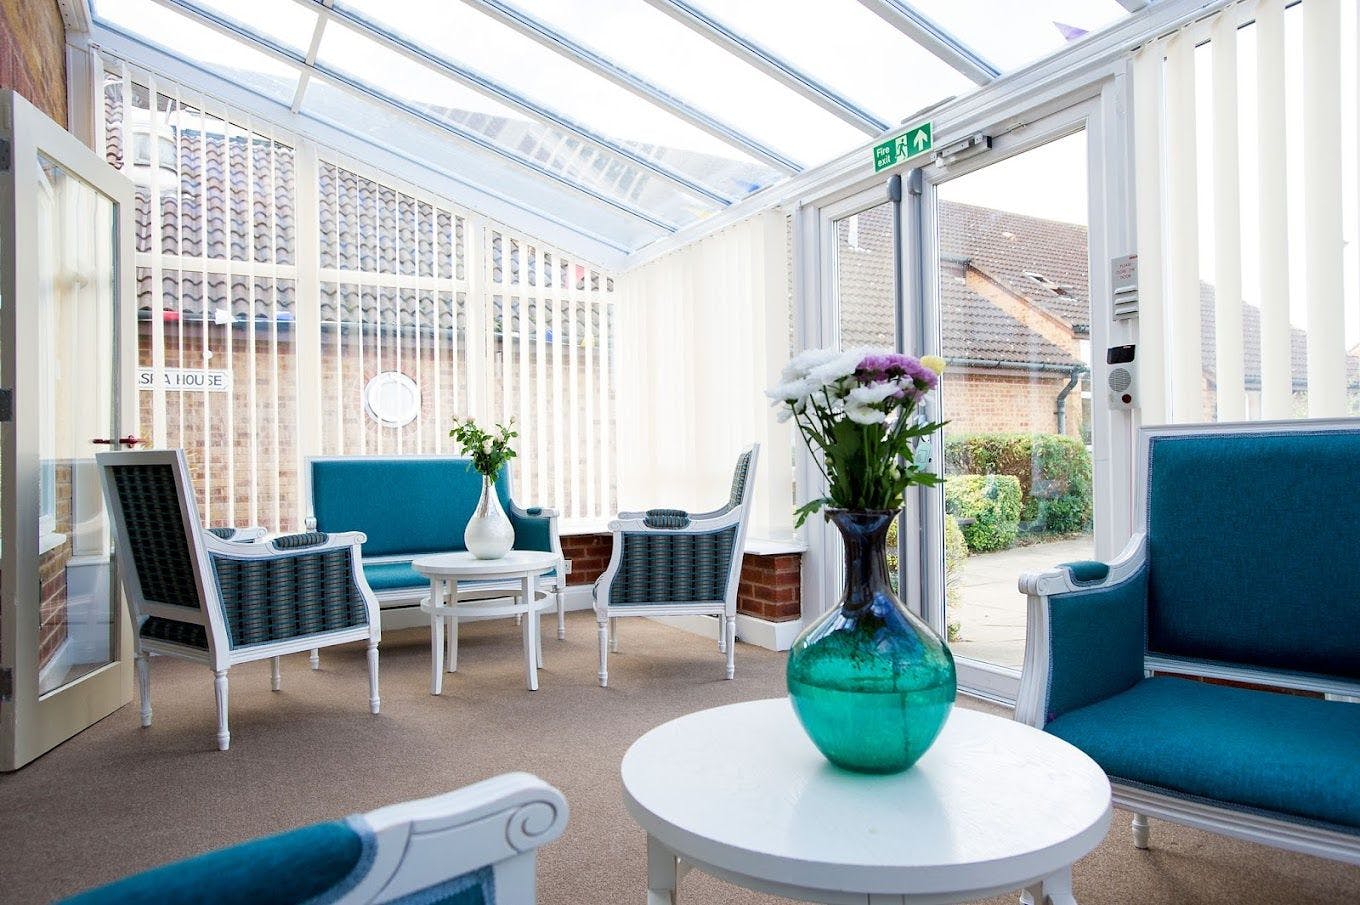 Conservatory at Asra house care home Leicester, Leicestershire